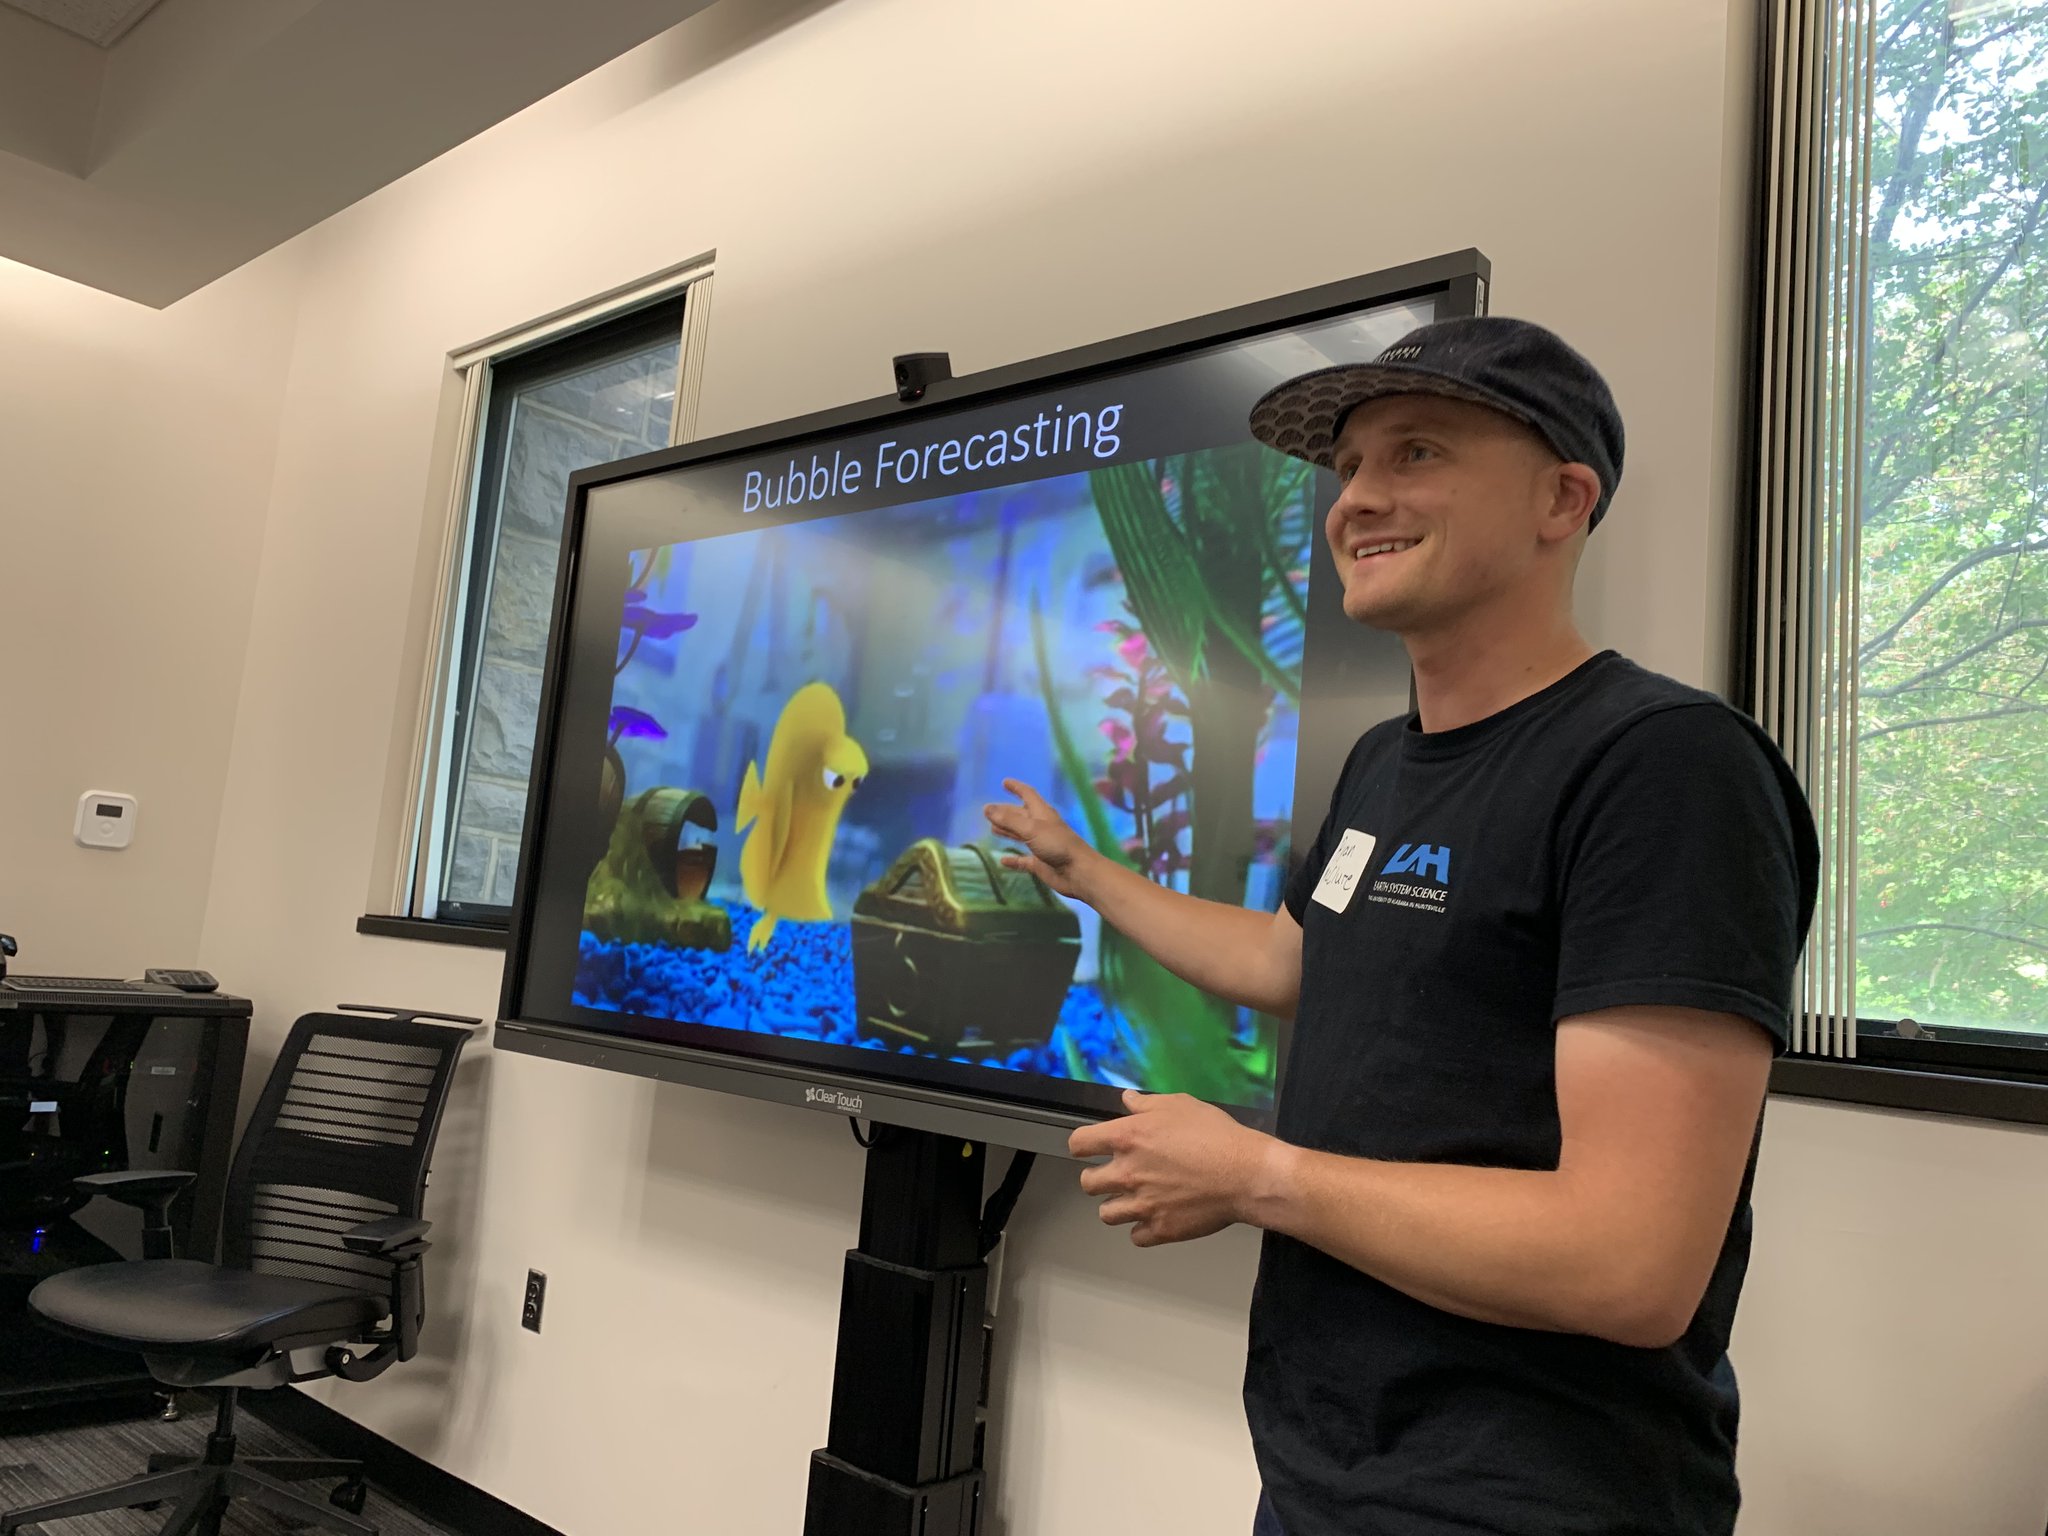 Ryan @ryan_mclake unveils (the 1st ever??) near-term iterative @eco4cast for CH4 ebullition- stay tuned for weekly updates throughout the summer! W lots of help from the field crew @AquaticAshley @MEL_Phytos @planktongirl16 @whittercritterr @DexterHoward77 & more